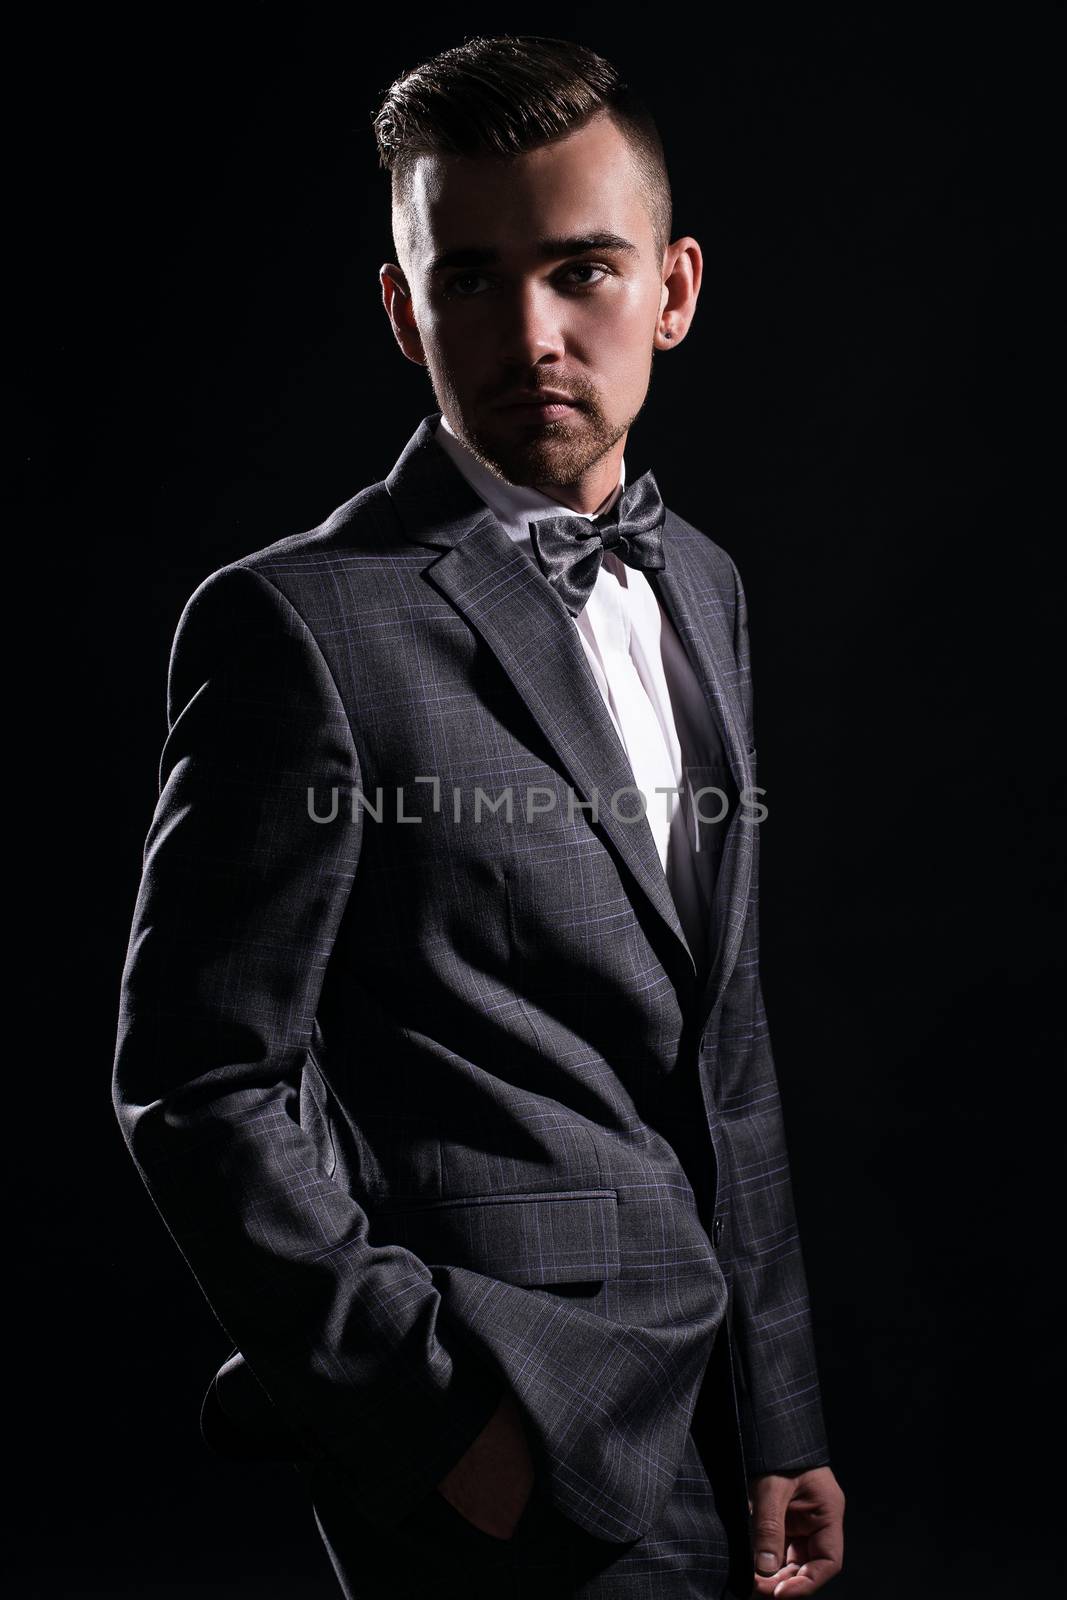 Portrait of a handsome man in a suit who is posing over a black background